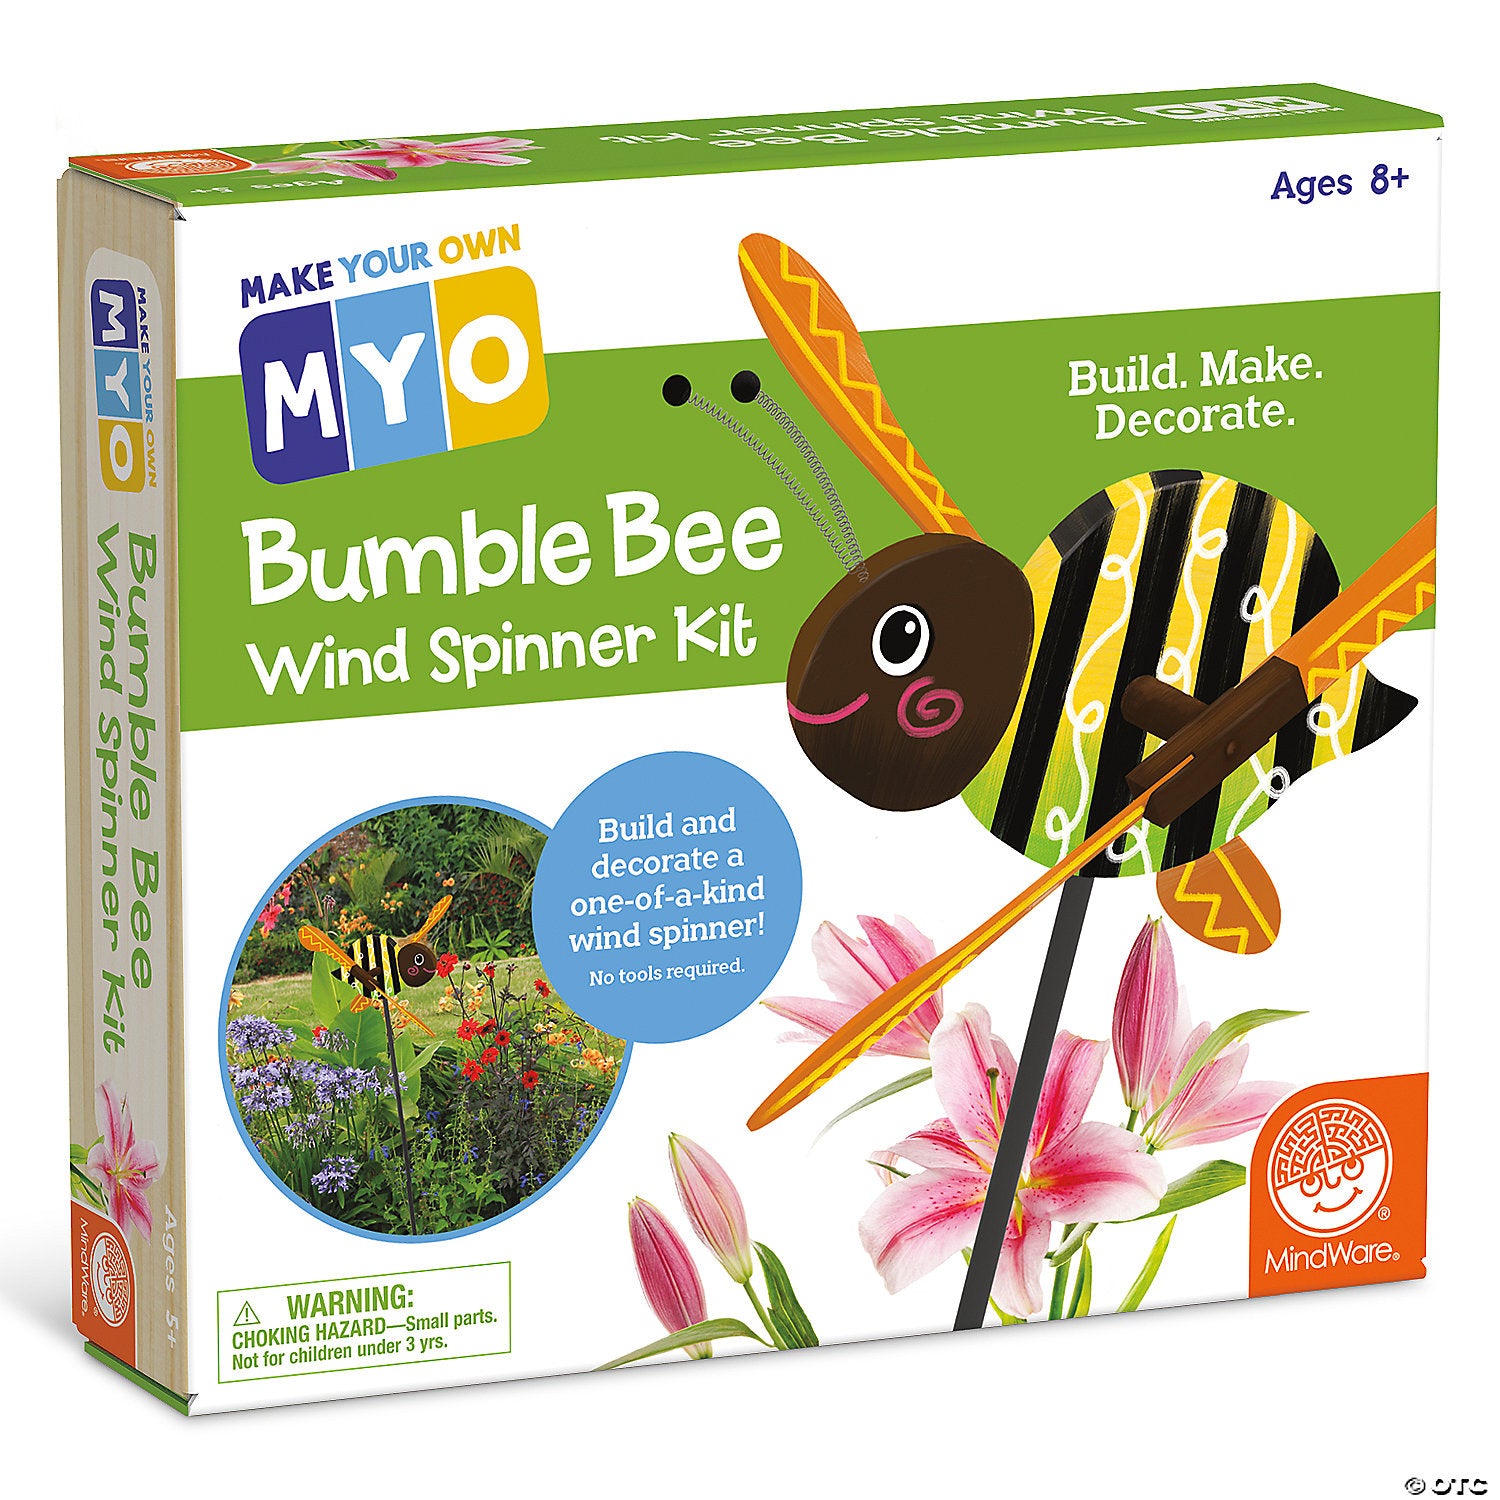 Make Your Own Wind Spinner - Bumble Bee